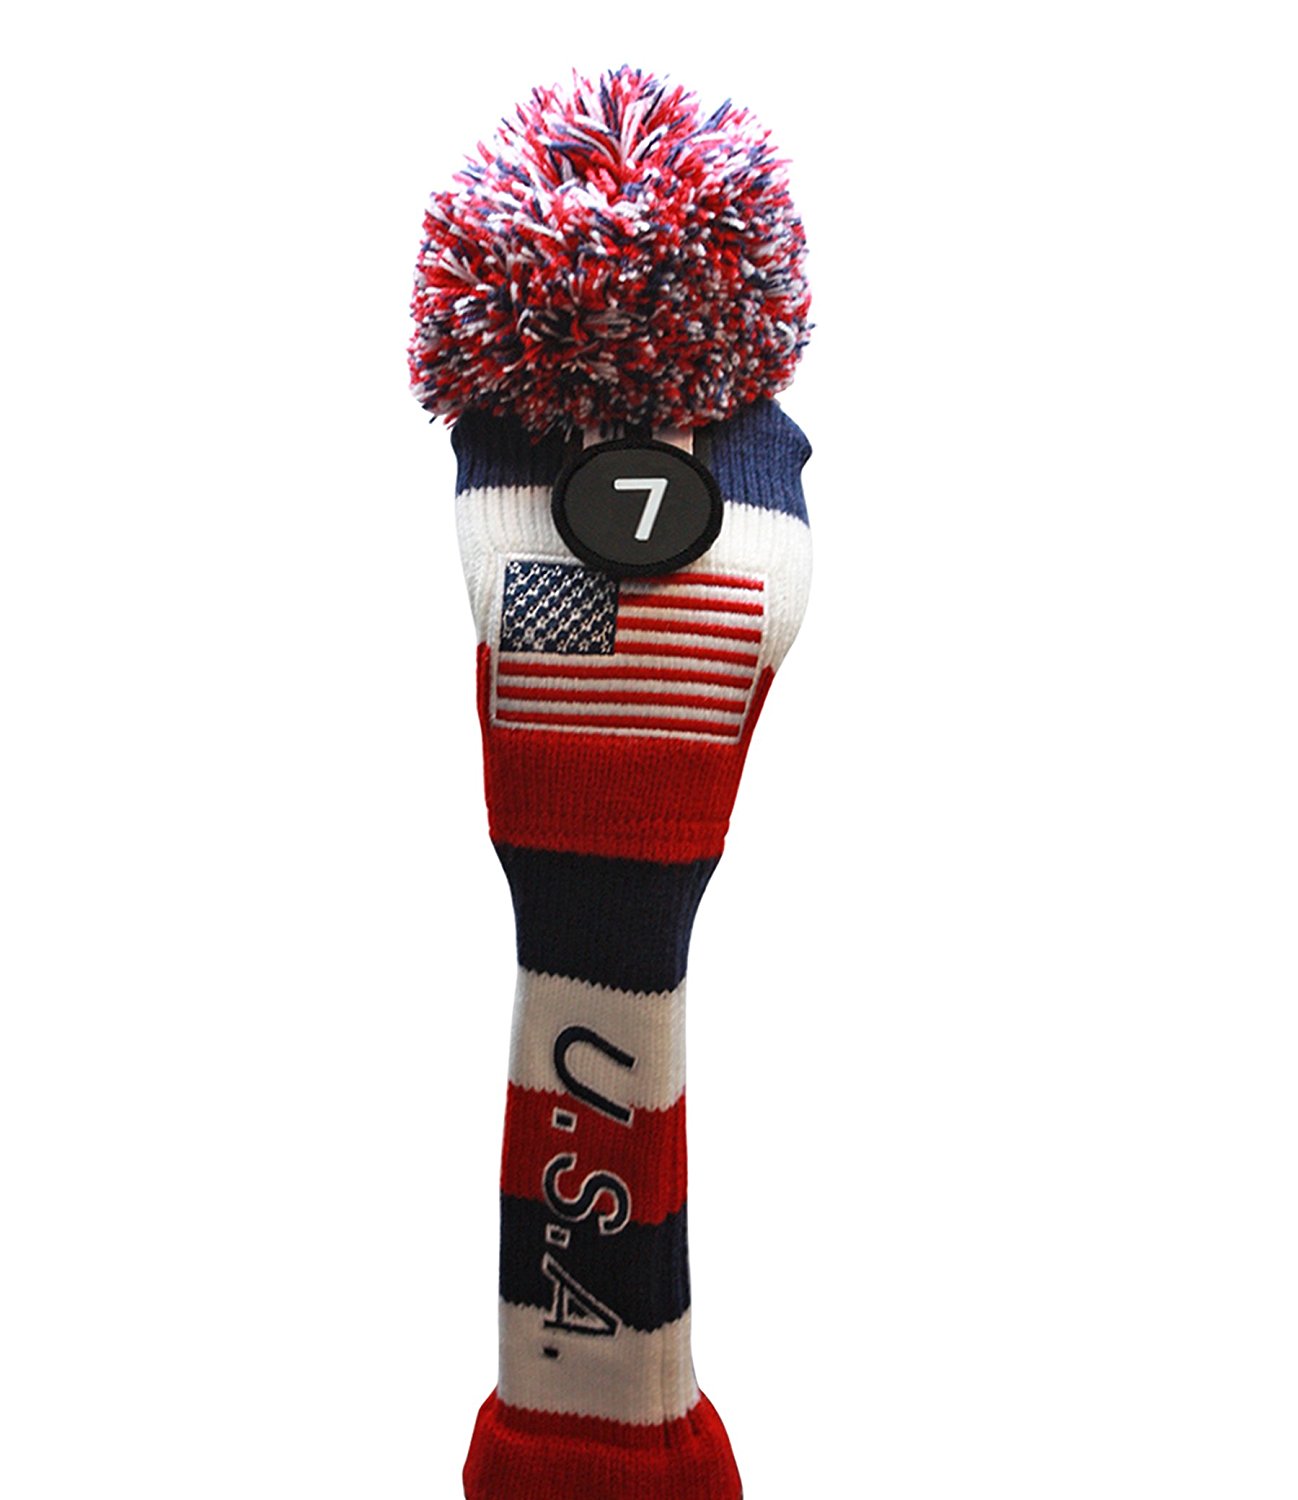 USA Majek Golf Driver 1 3 5 7 Fairway Woods Headcovers Pom Pom Knit Limited Edition Vintage Classic Traditional Flag Stars Red White Blue Stripes Retro Head Cover Fits 460cc Drivers and 260cc Woods - image 5 of 8